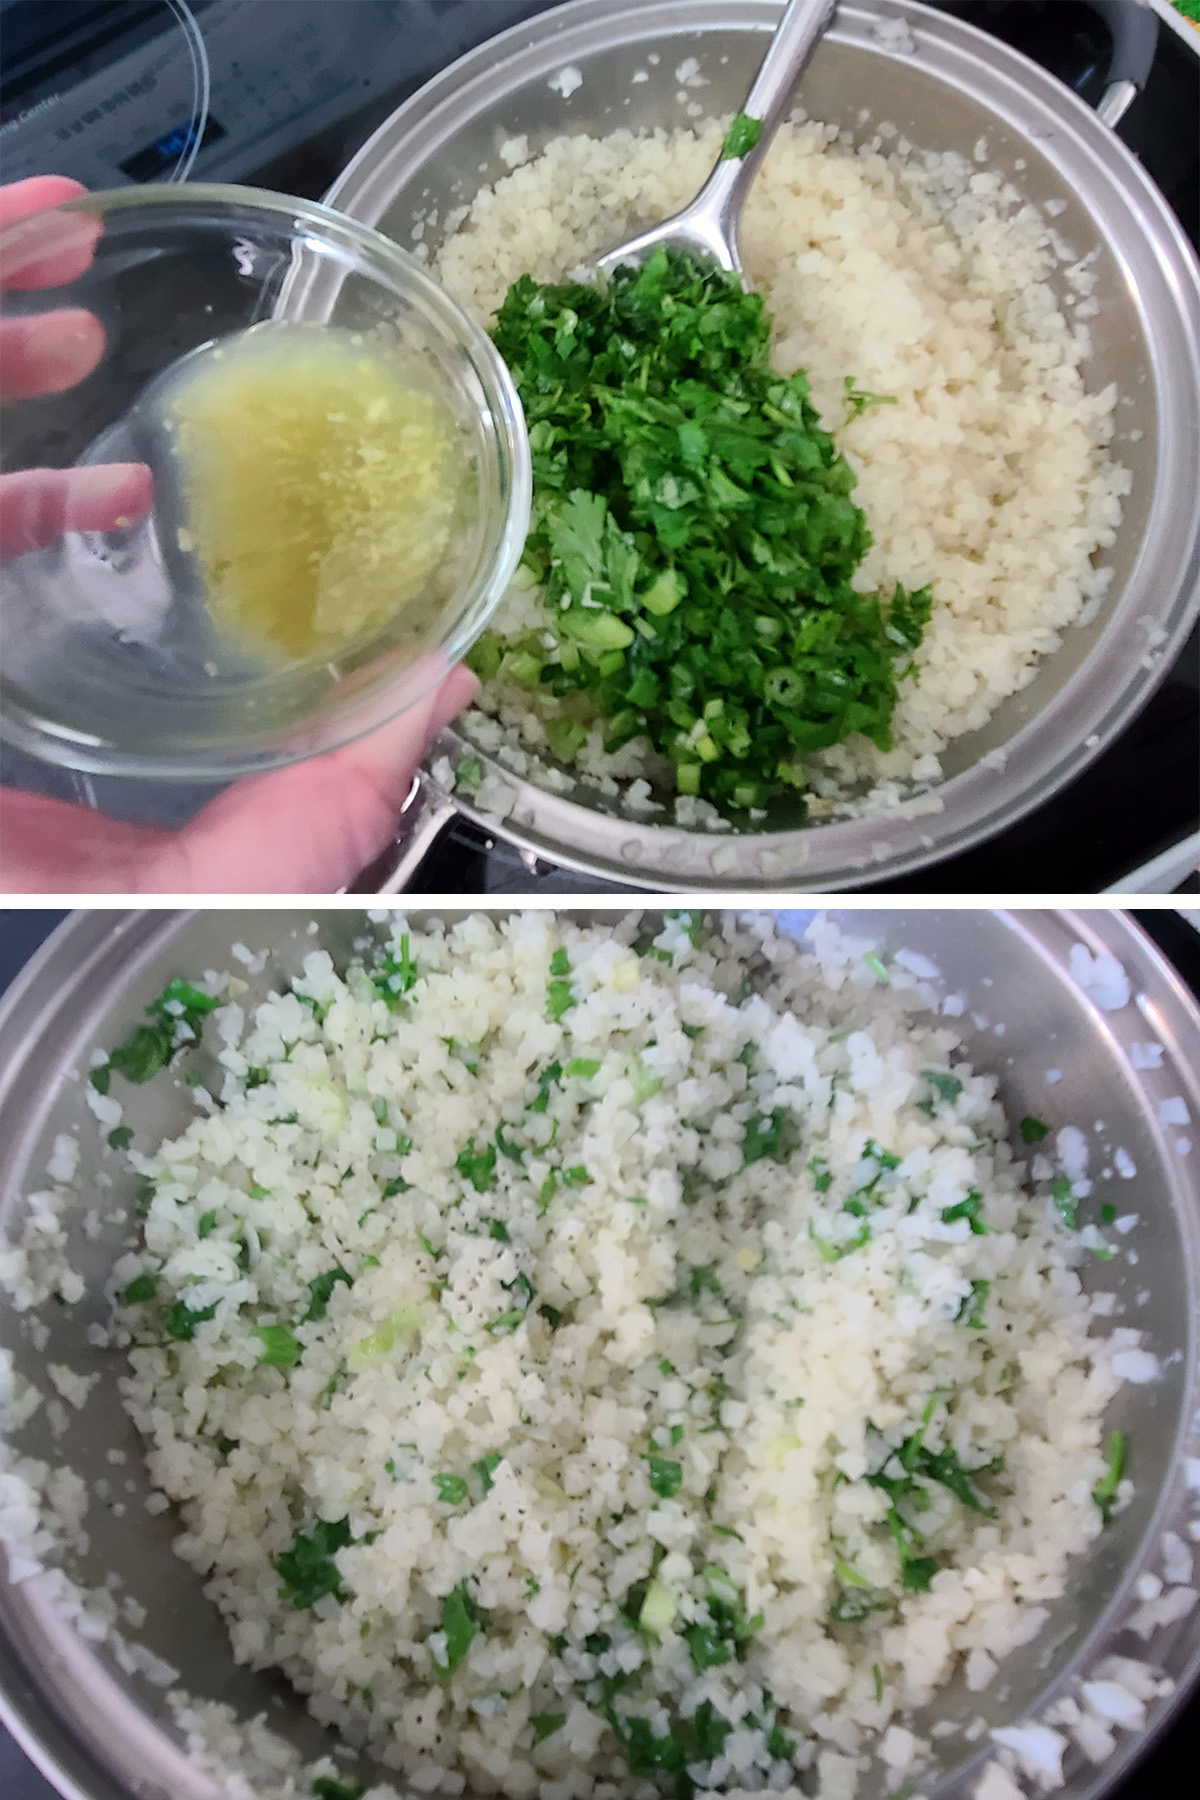 The cilantro, green onions, and lime being added to the cauliflower rice, and mixed in.